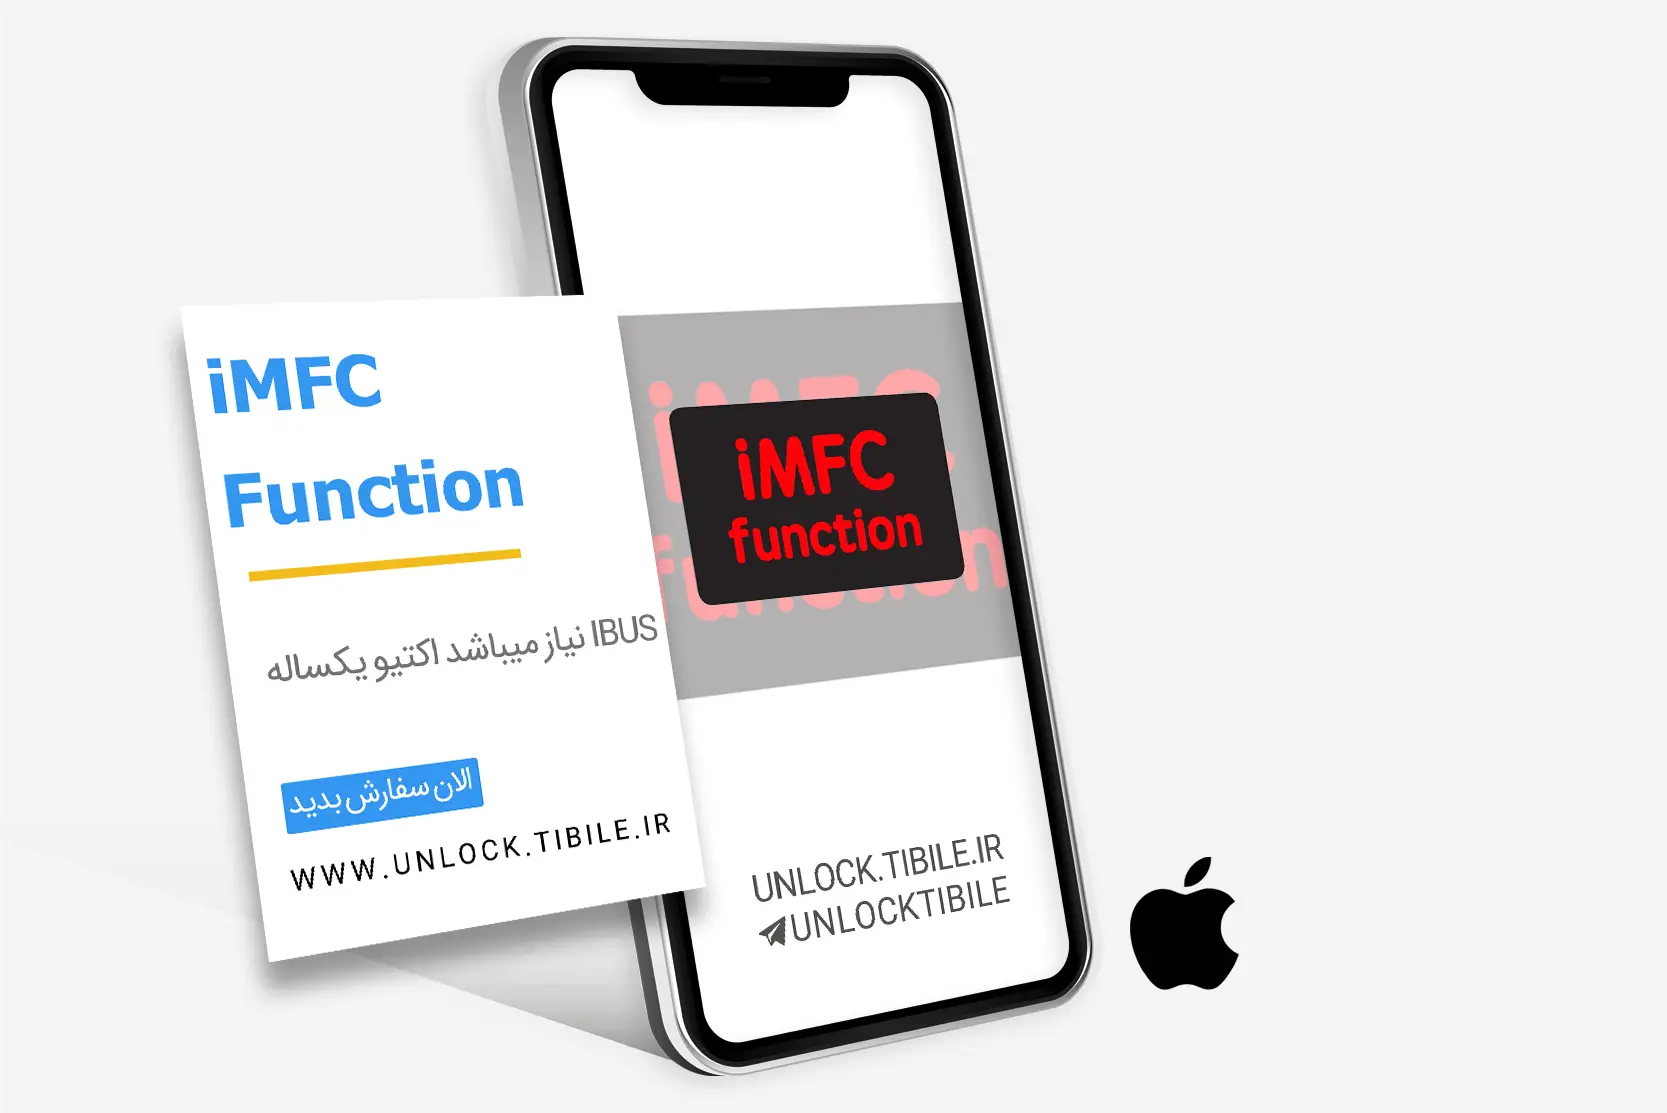 iMFC Function